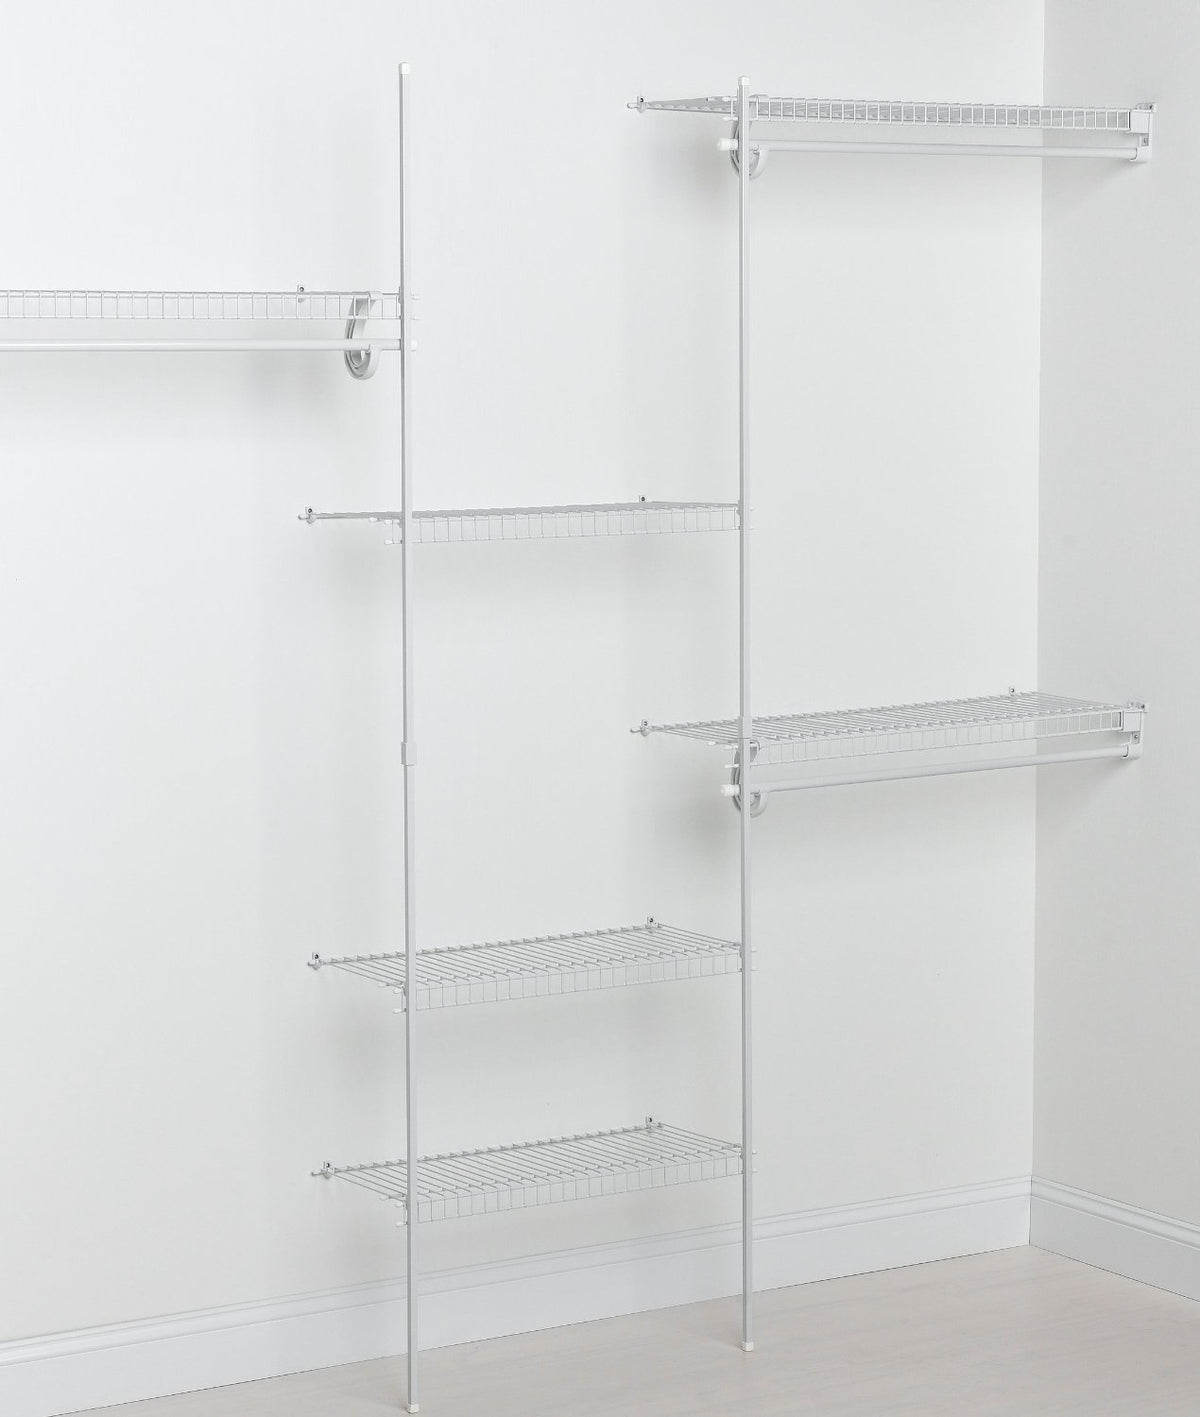 Buy closetmaid 5636 - Online store for shelving & closet, kits in USA, on sale, low price, discount deals, coupon code